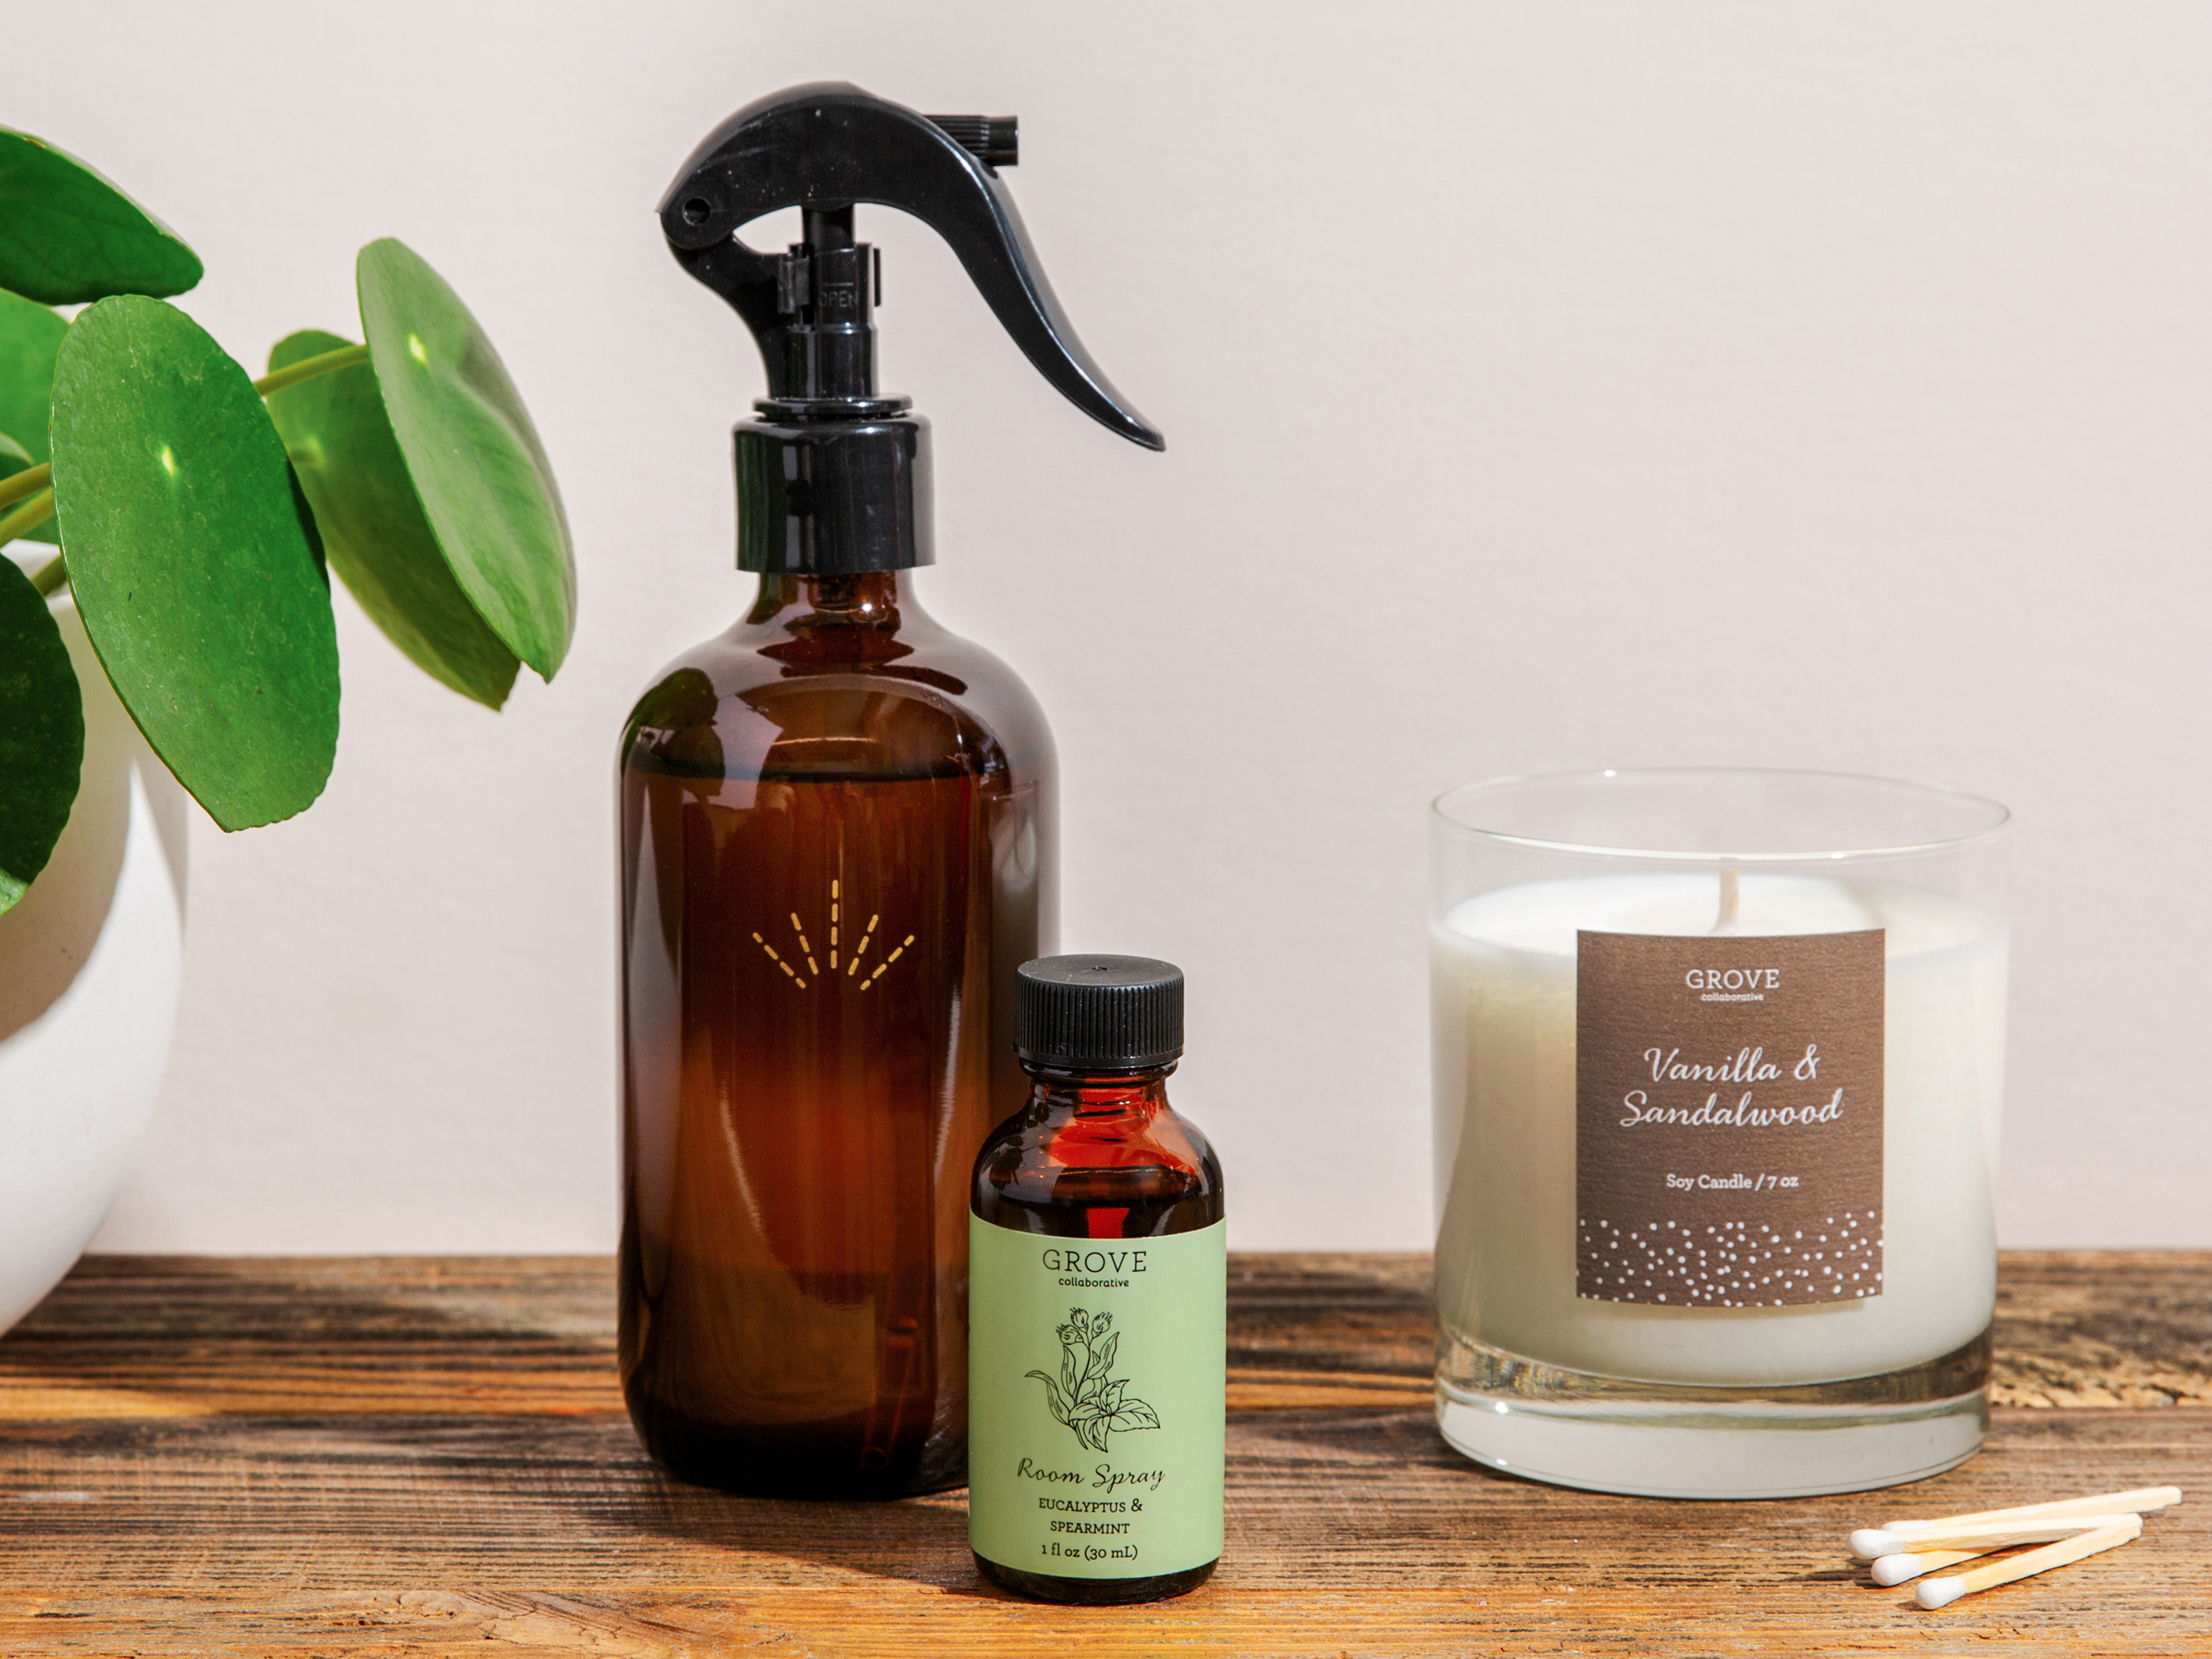 Image of Grove Co. room spray bottle and essential oil next to candle